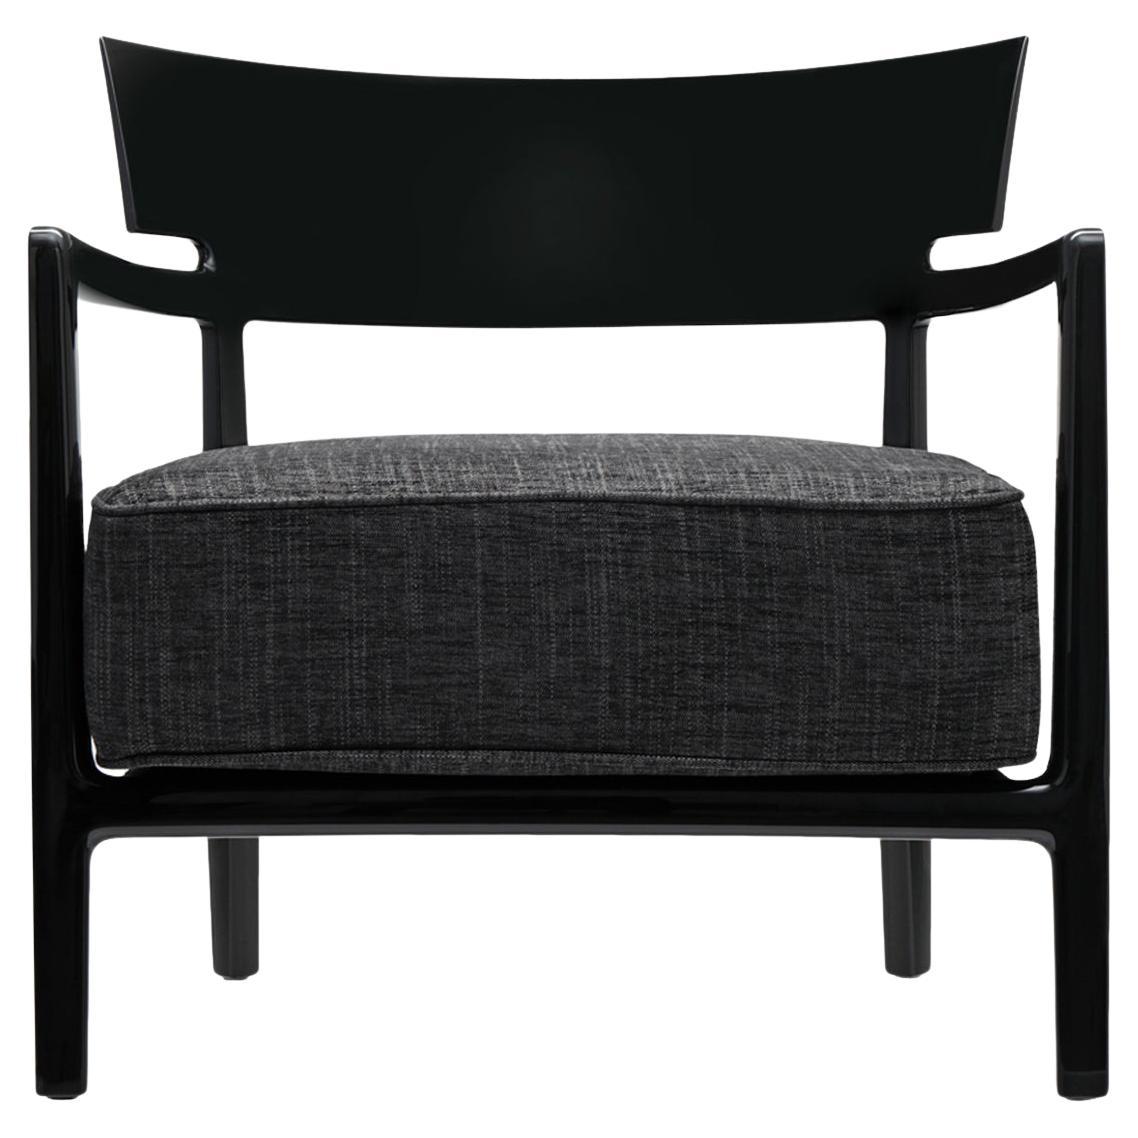 Kartell Cara Chair Black Antracite by Philippe Starck with Sergio Schito